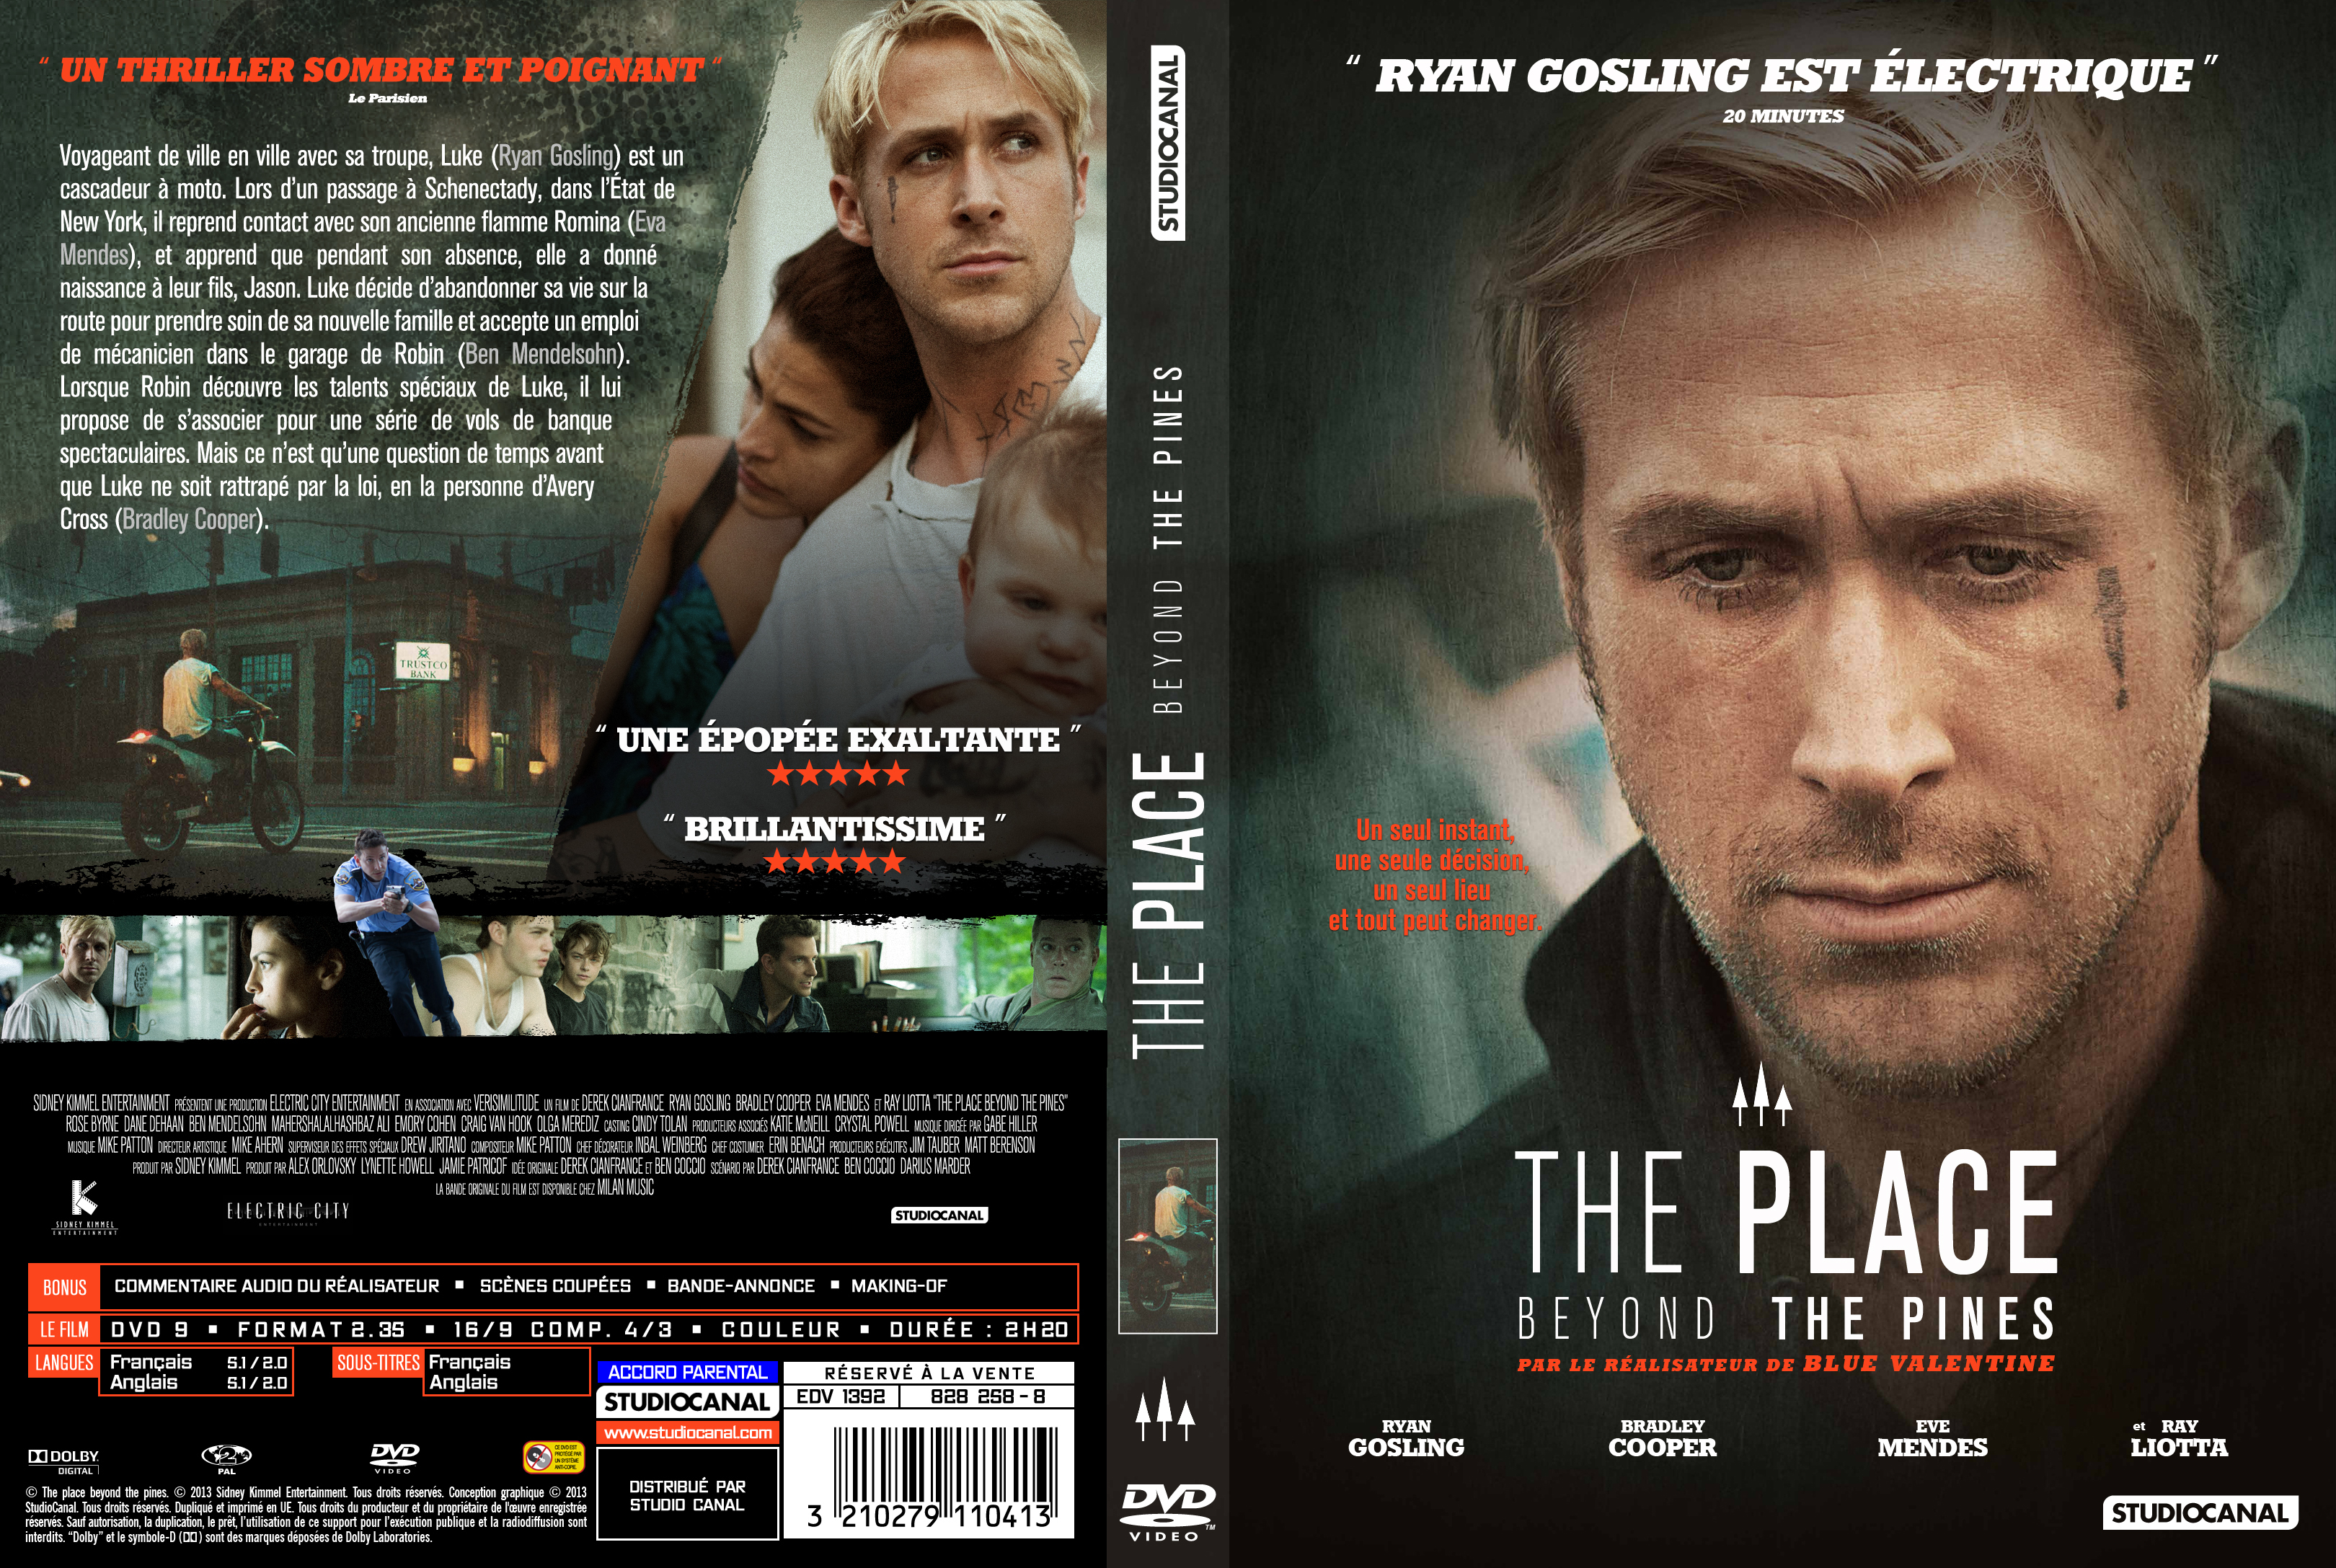 Jaquette DVD The place beyond the pines custom